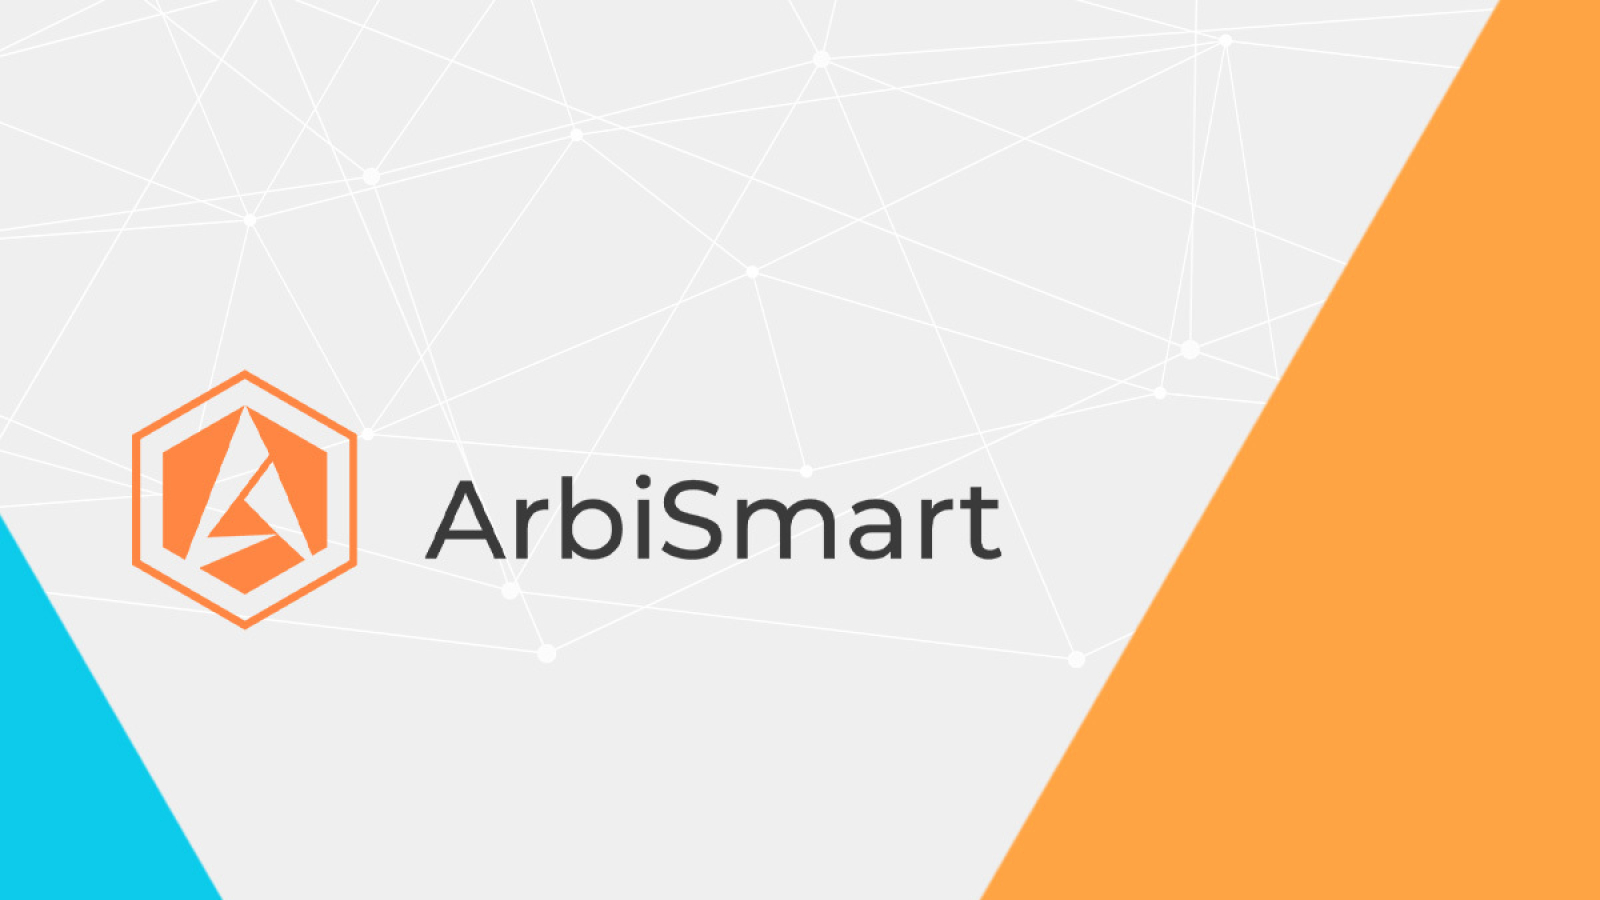 New Player in the Crypto Space, ArbiSmart, Is a Complete Game-changer